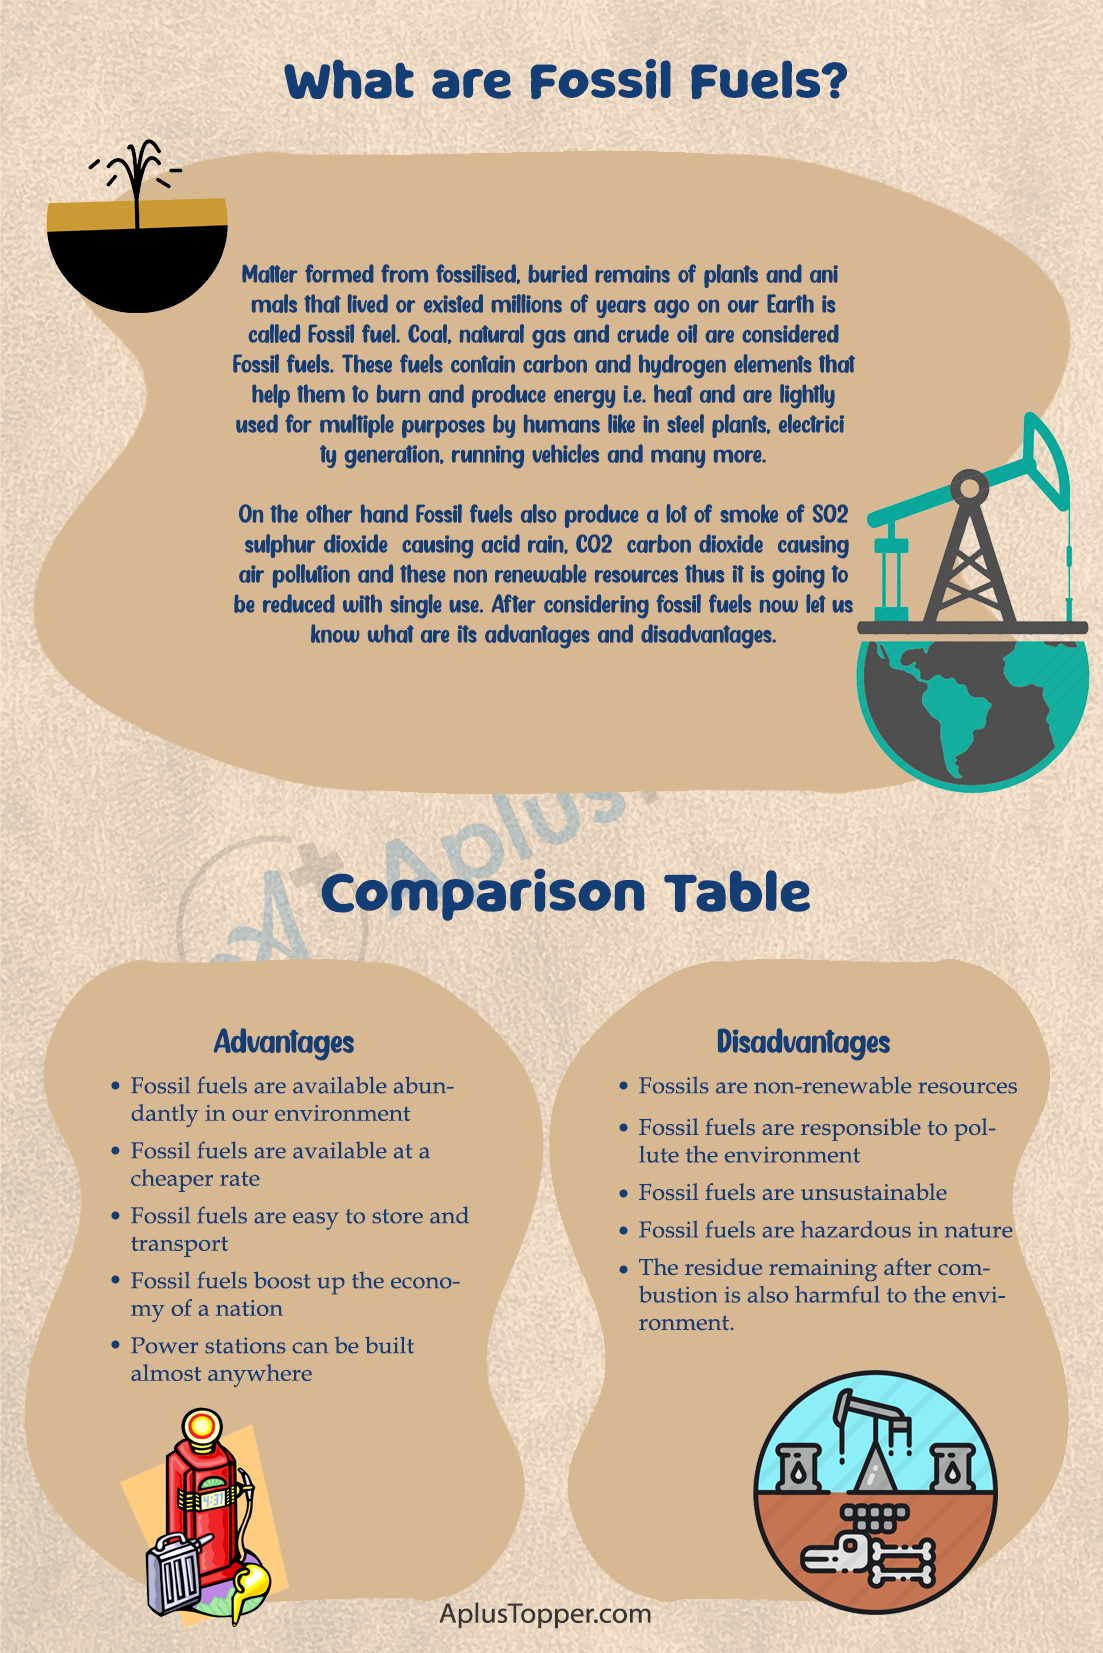 Advantages And Disadvantages of Fossil Fuels 2